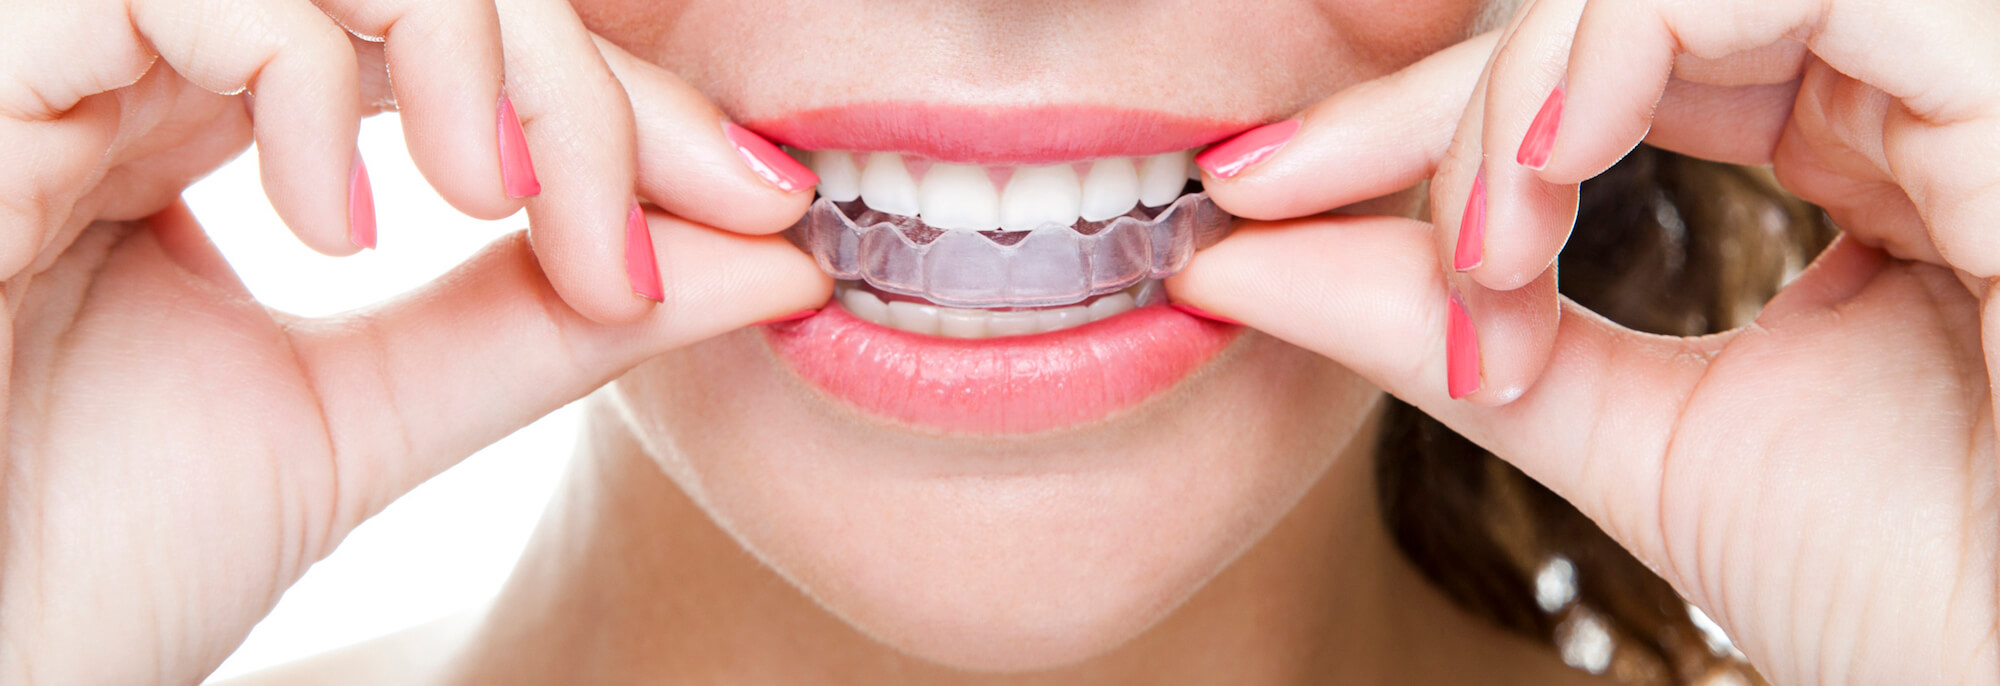 Invisalign - Invisible Braces - Los Angeles Dentist, Implant Dentistry